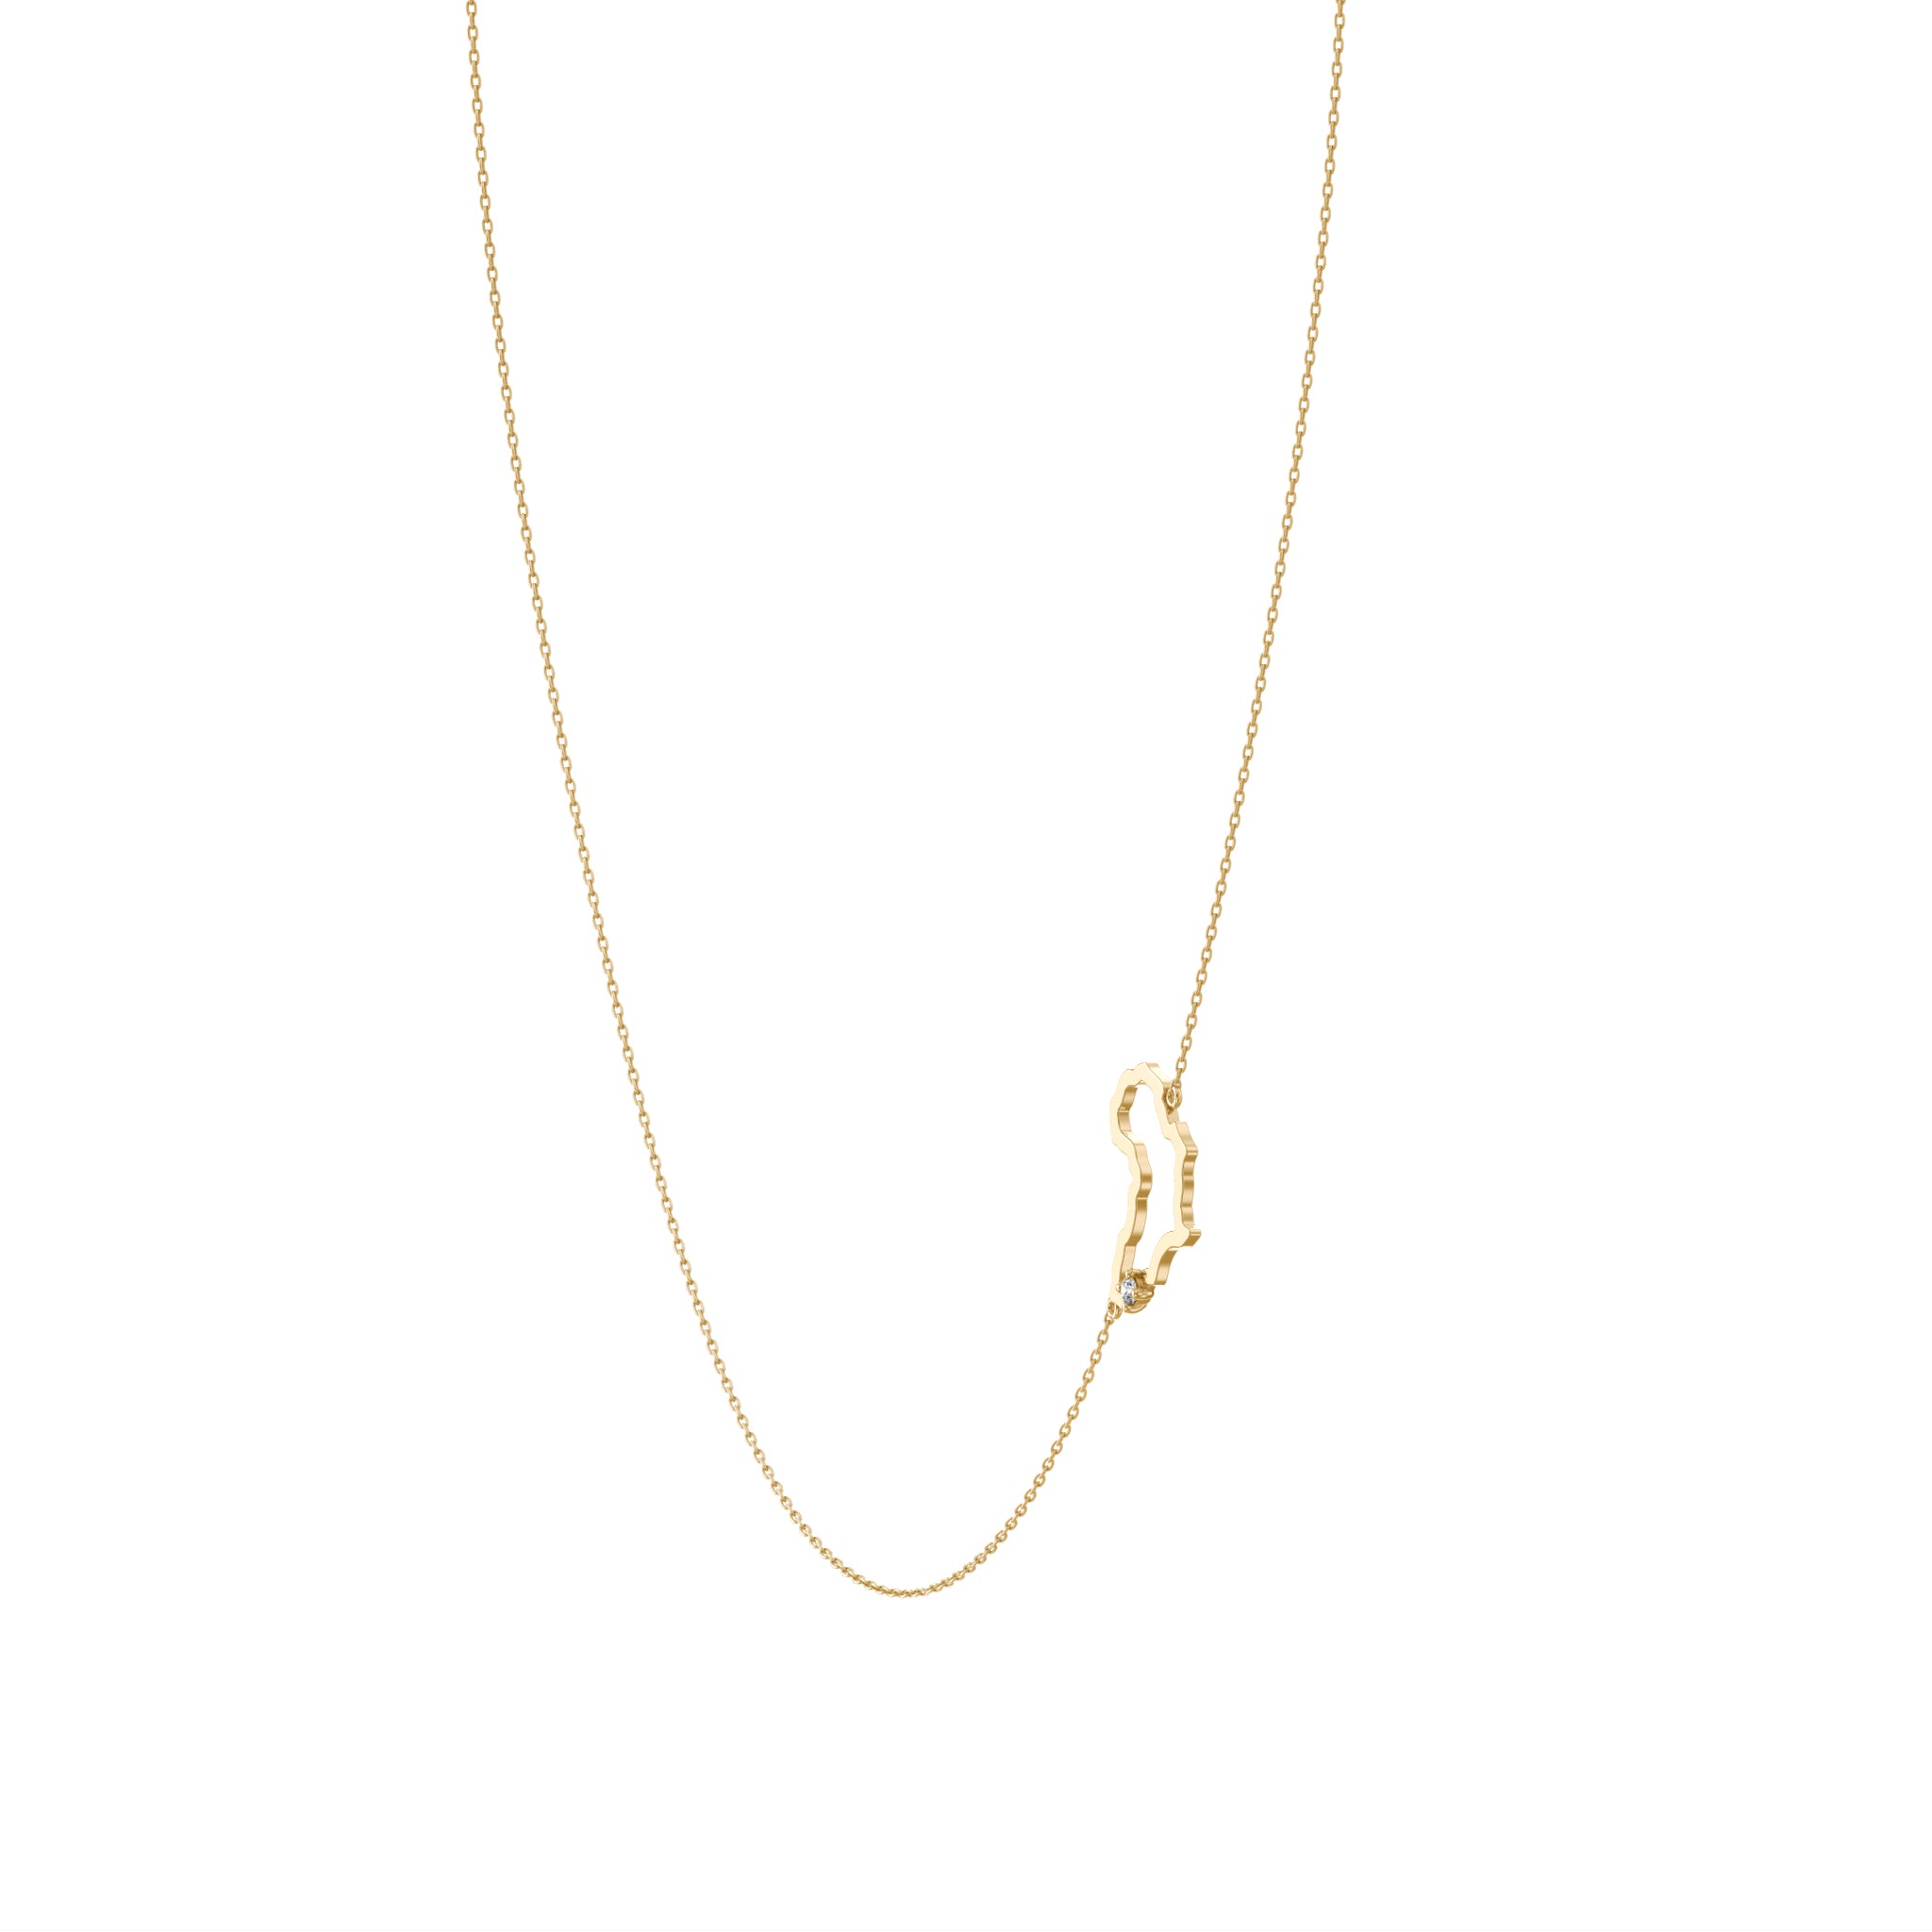 Shimansky - My Africa Diamond Necklace Crafted in 14K Yellow Gold